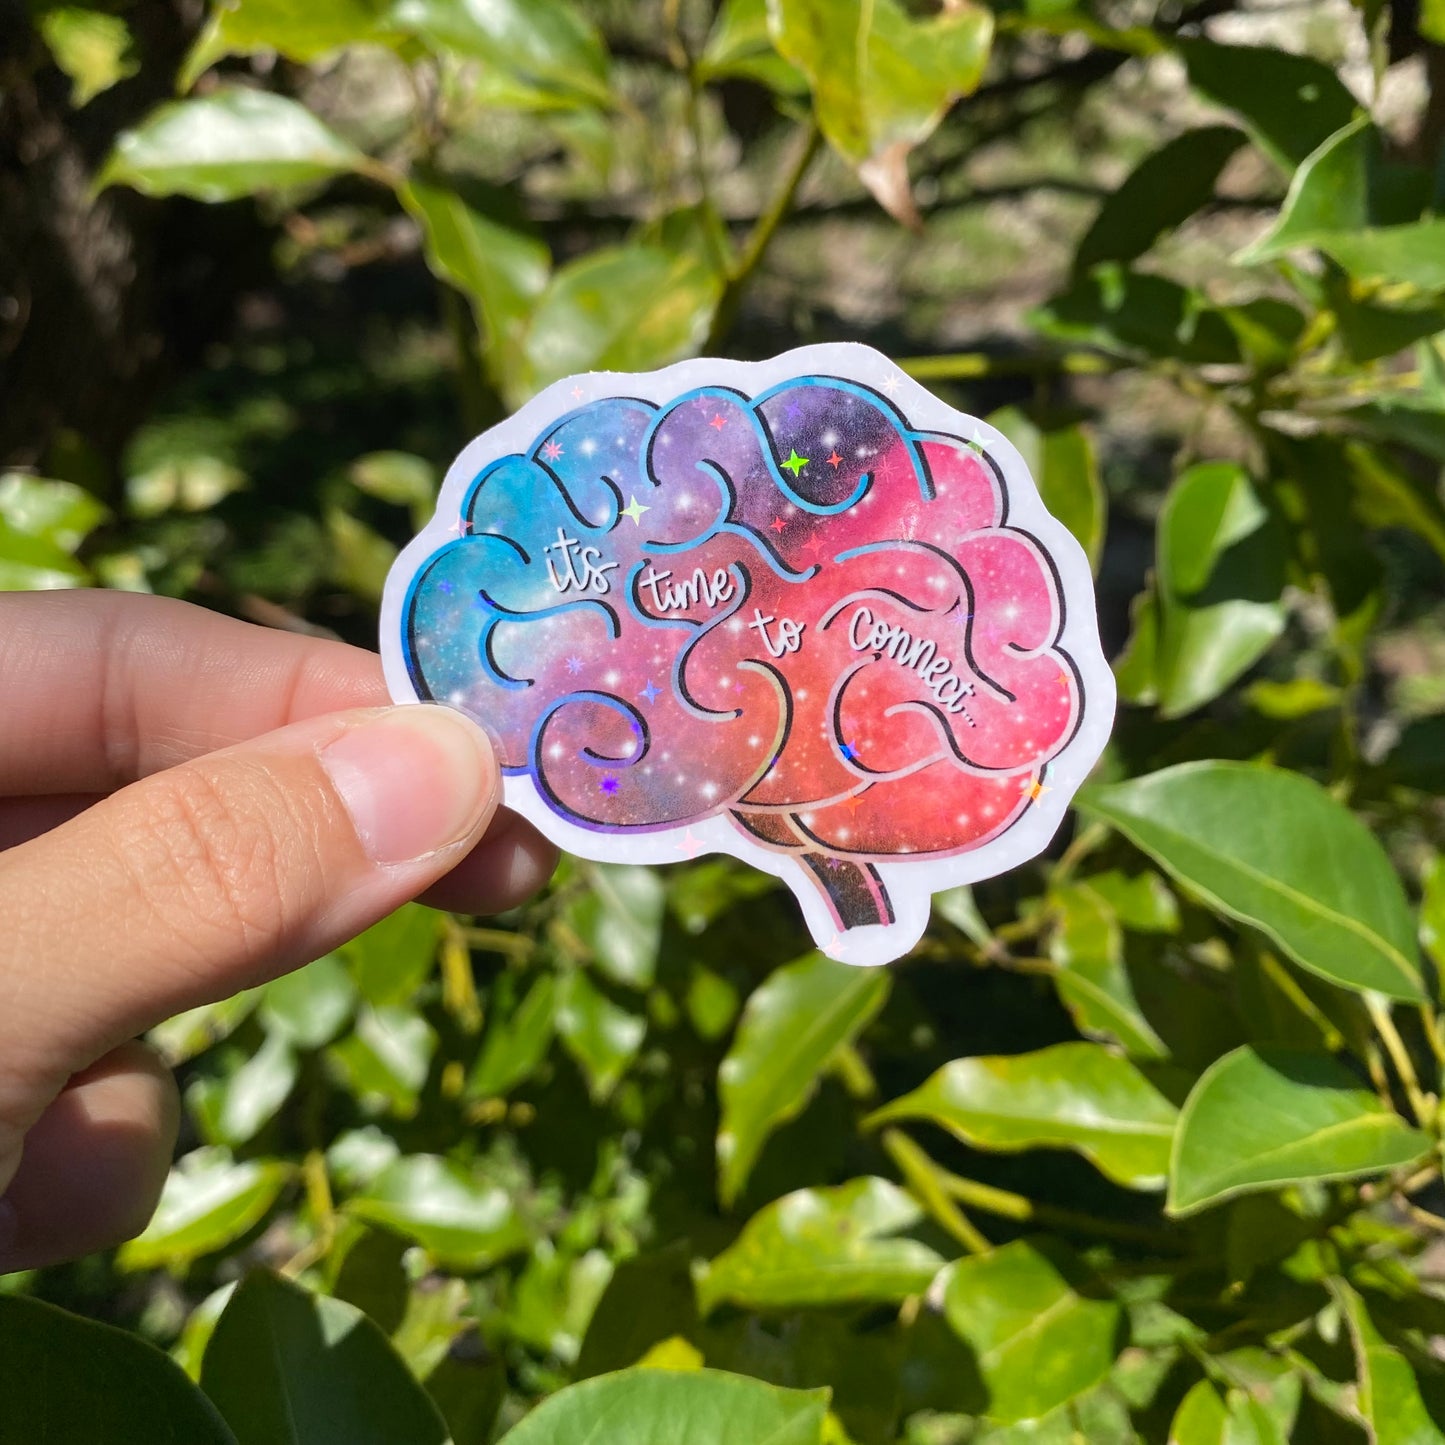 It's Time to Connect - Universe & Earth Sticker